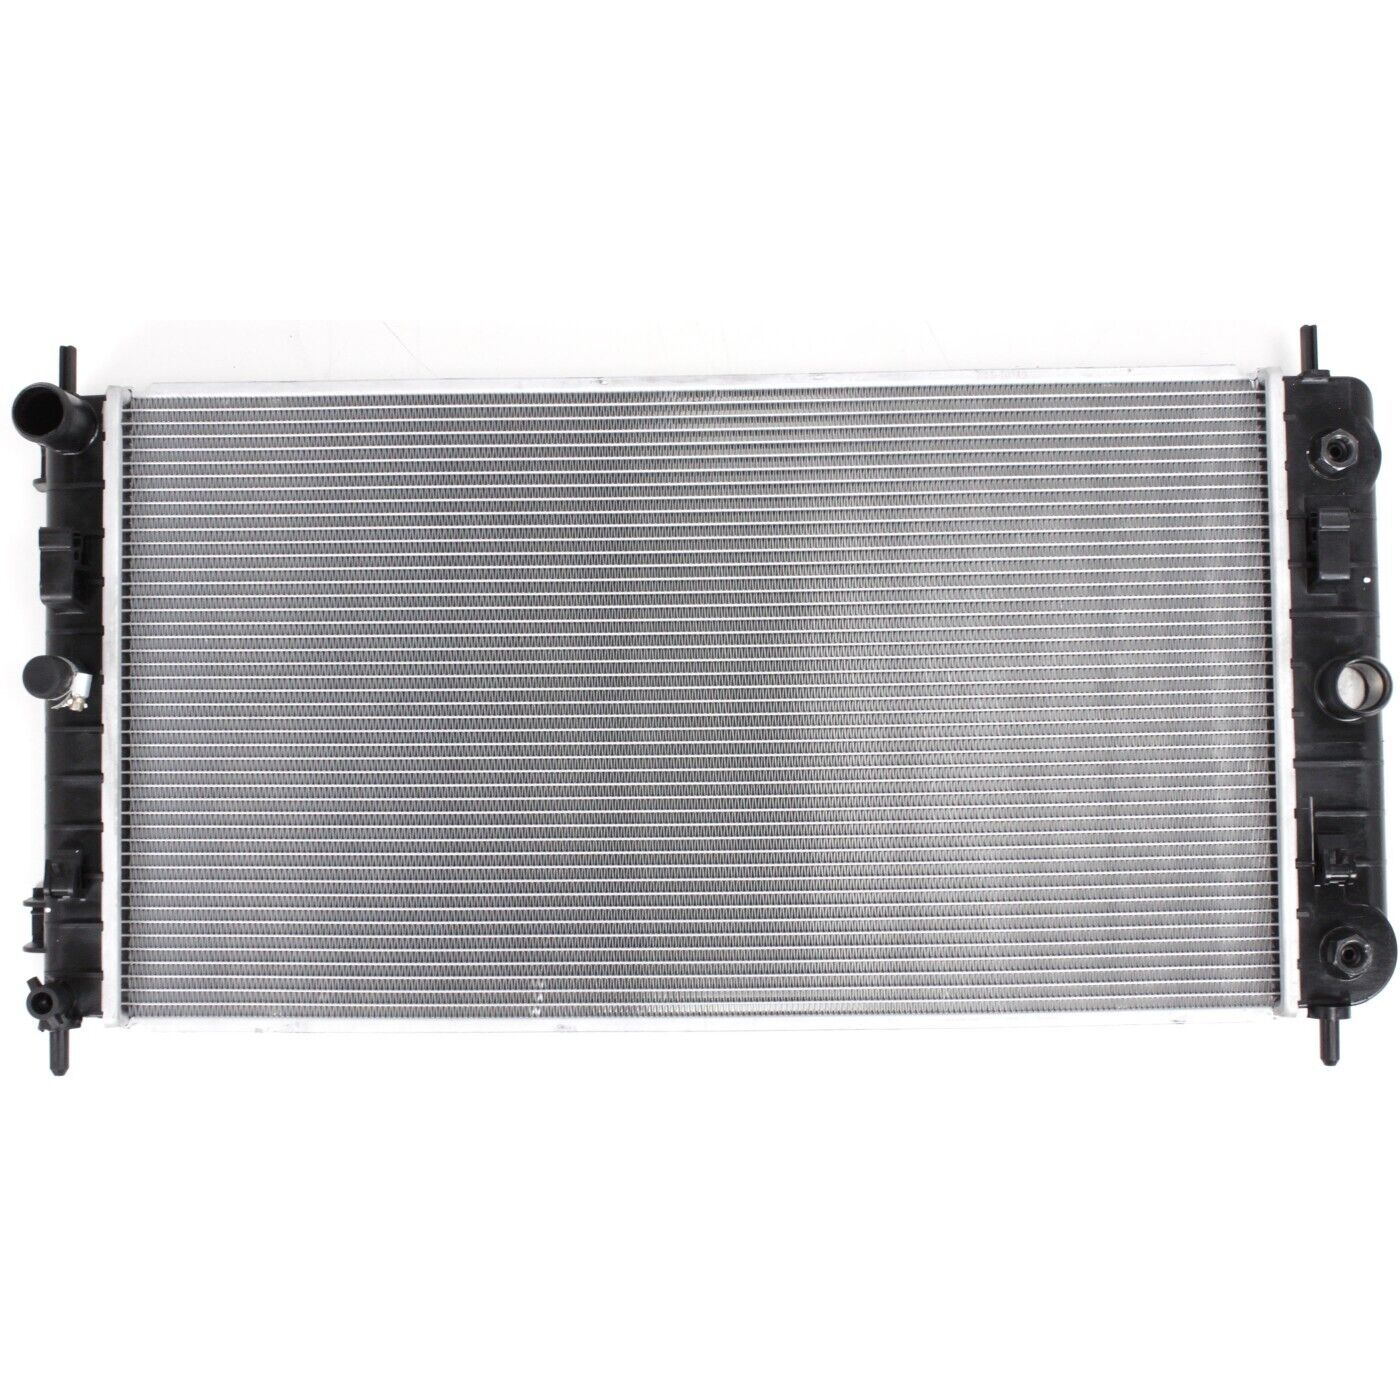 Aluminum Radiator For 2004-2010 Chevy Malibu 3.5L 3.9L With Transmission Cooler